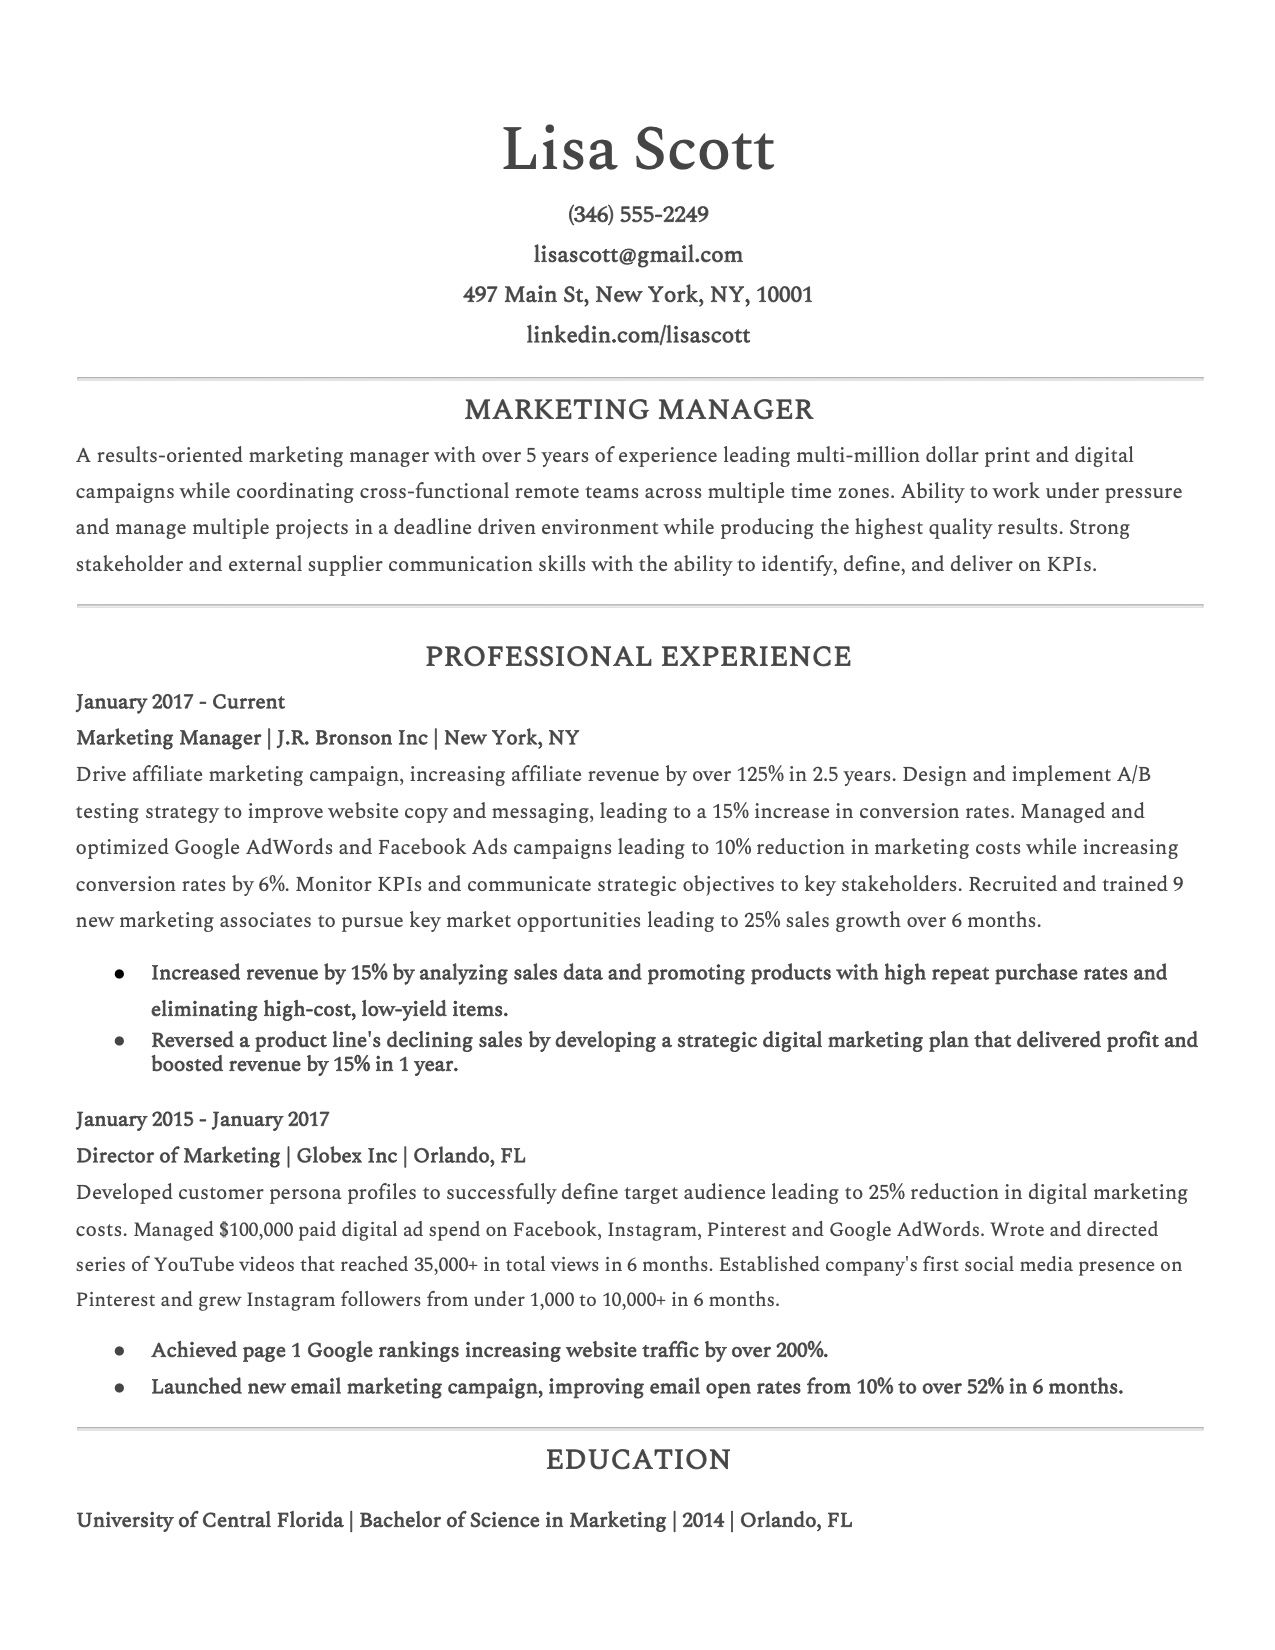 Build my resume with this template